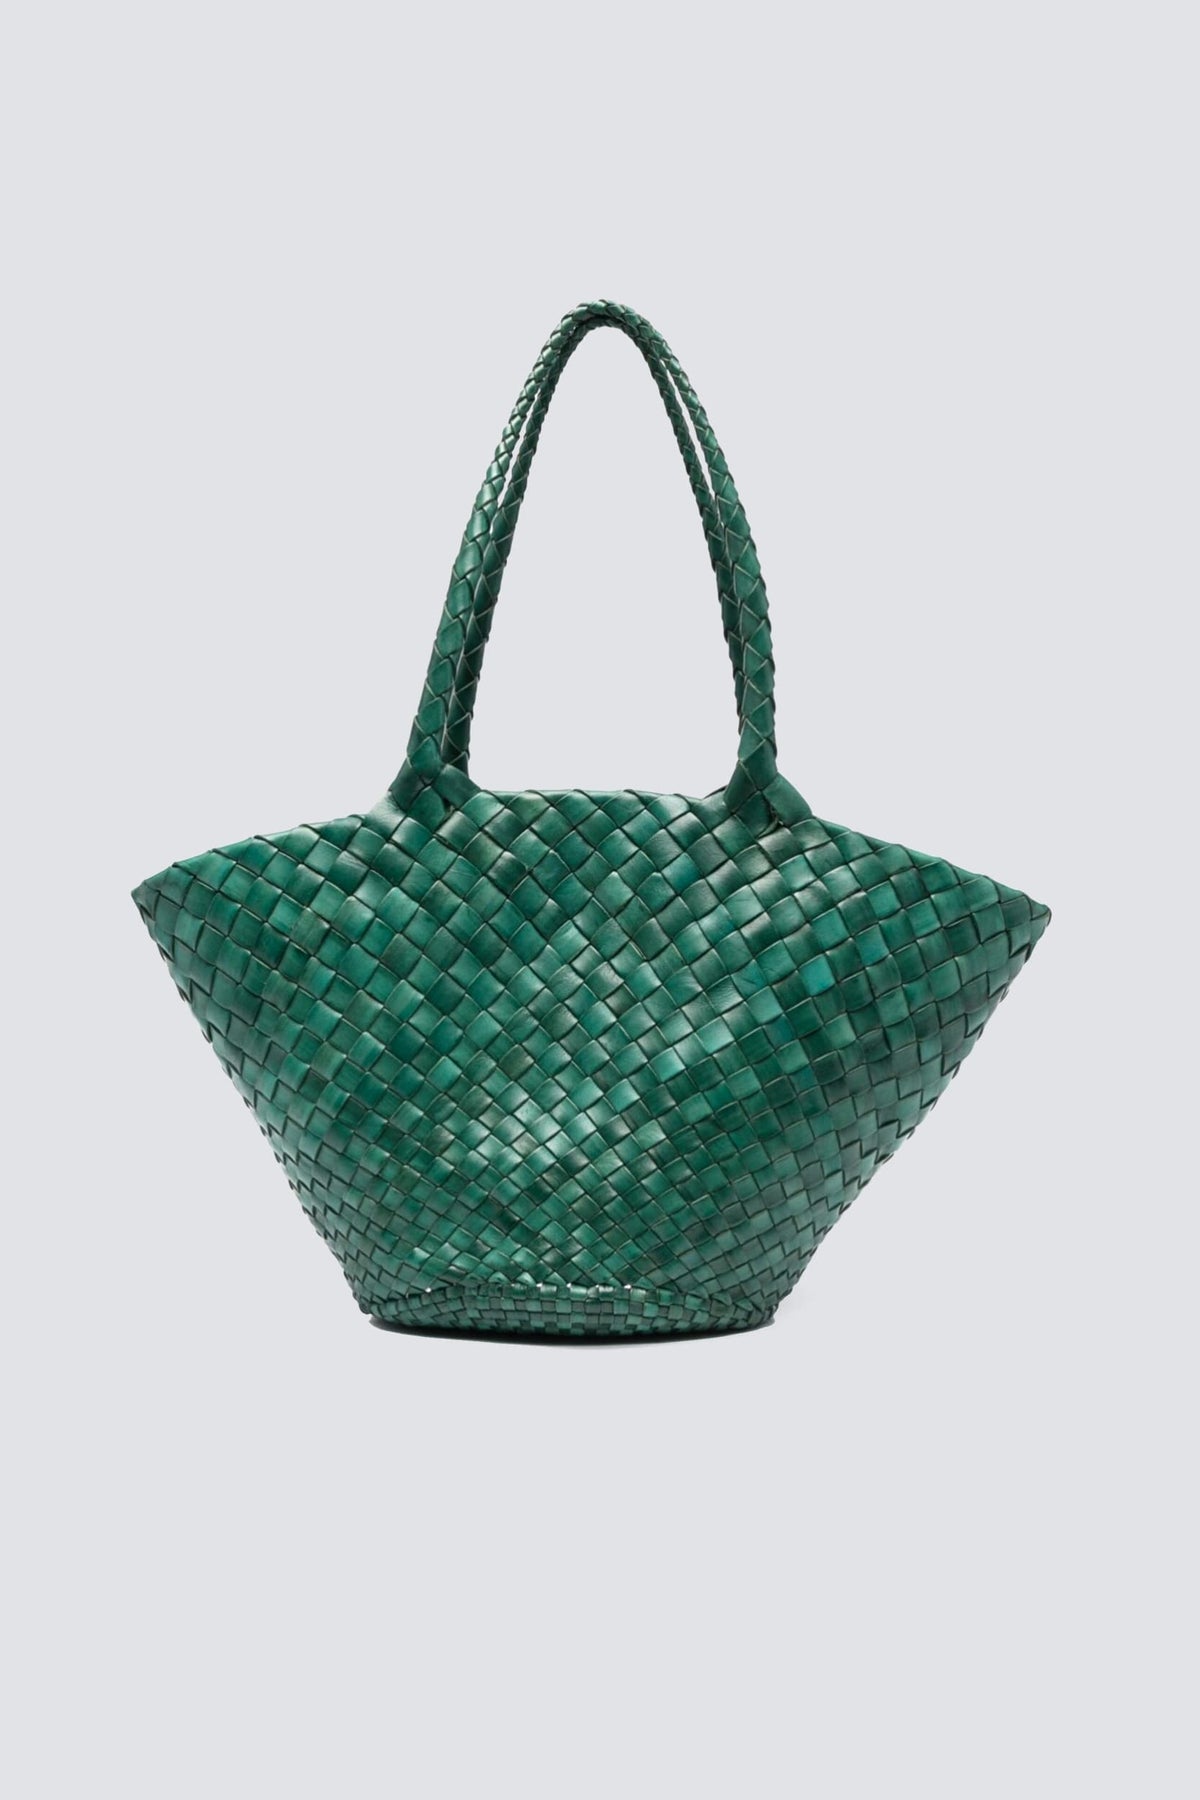 Dragon Diffusion - Egola Forest Green Woven Leather Bag